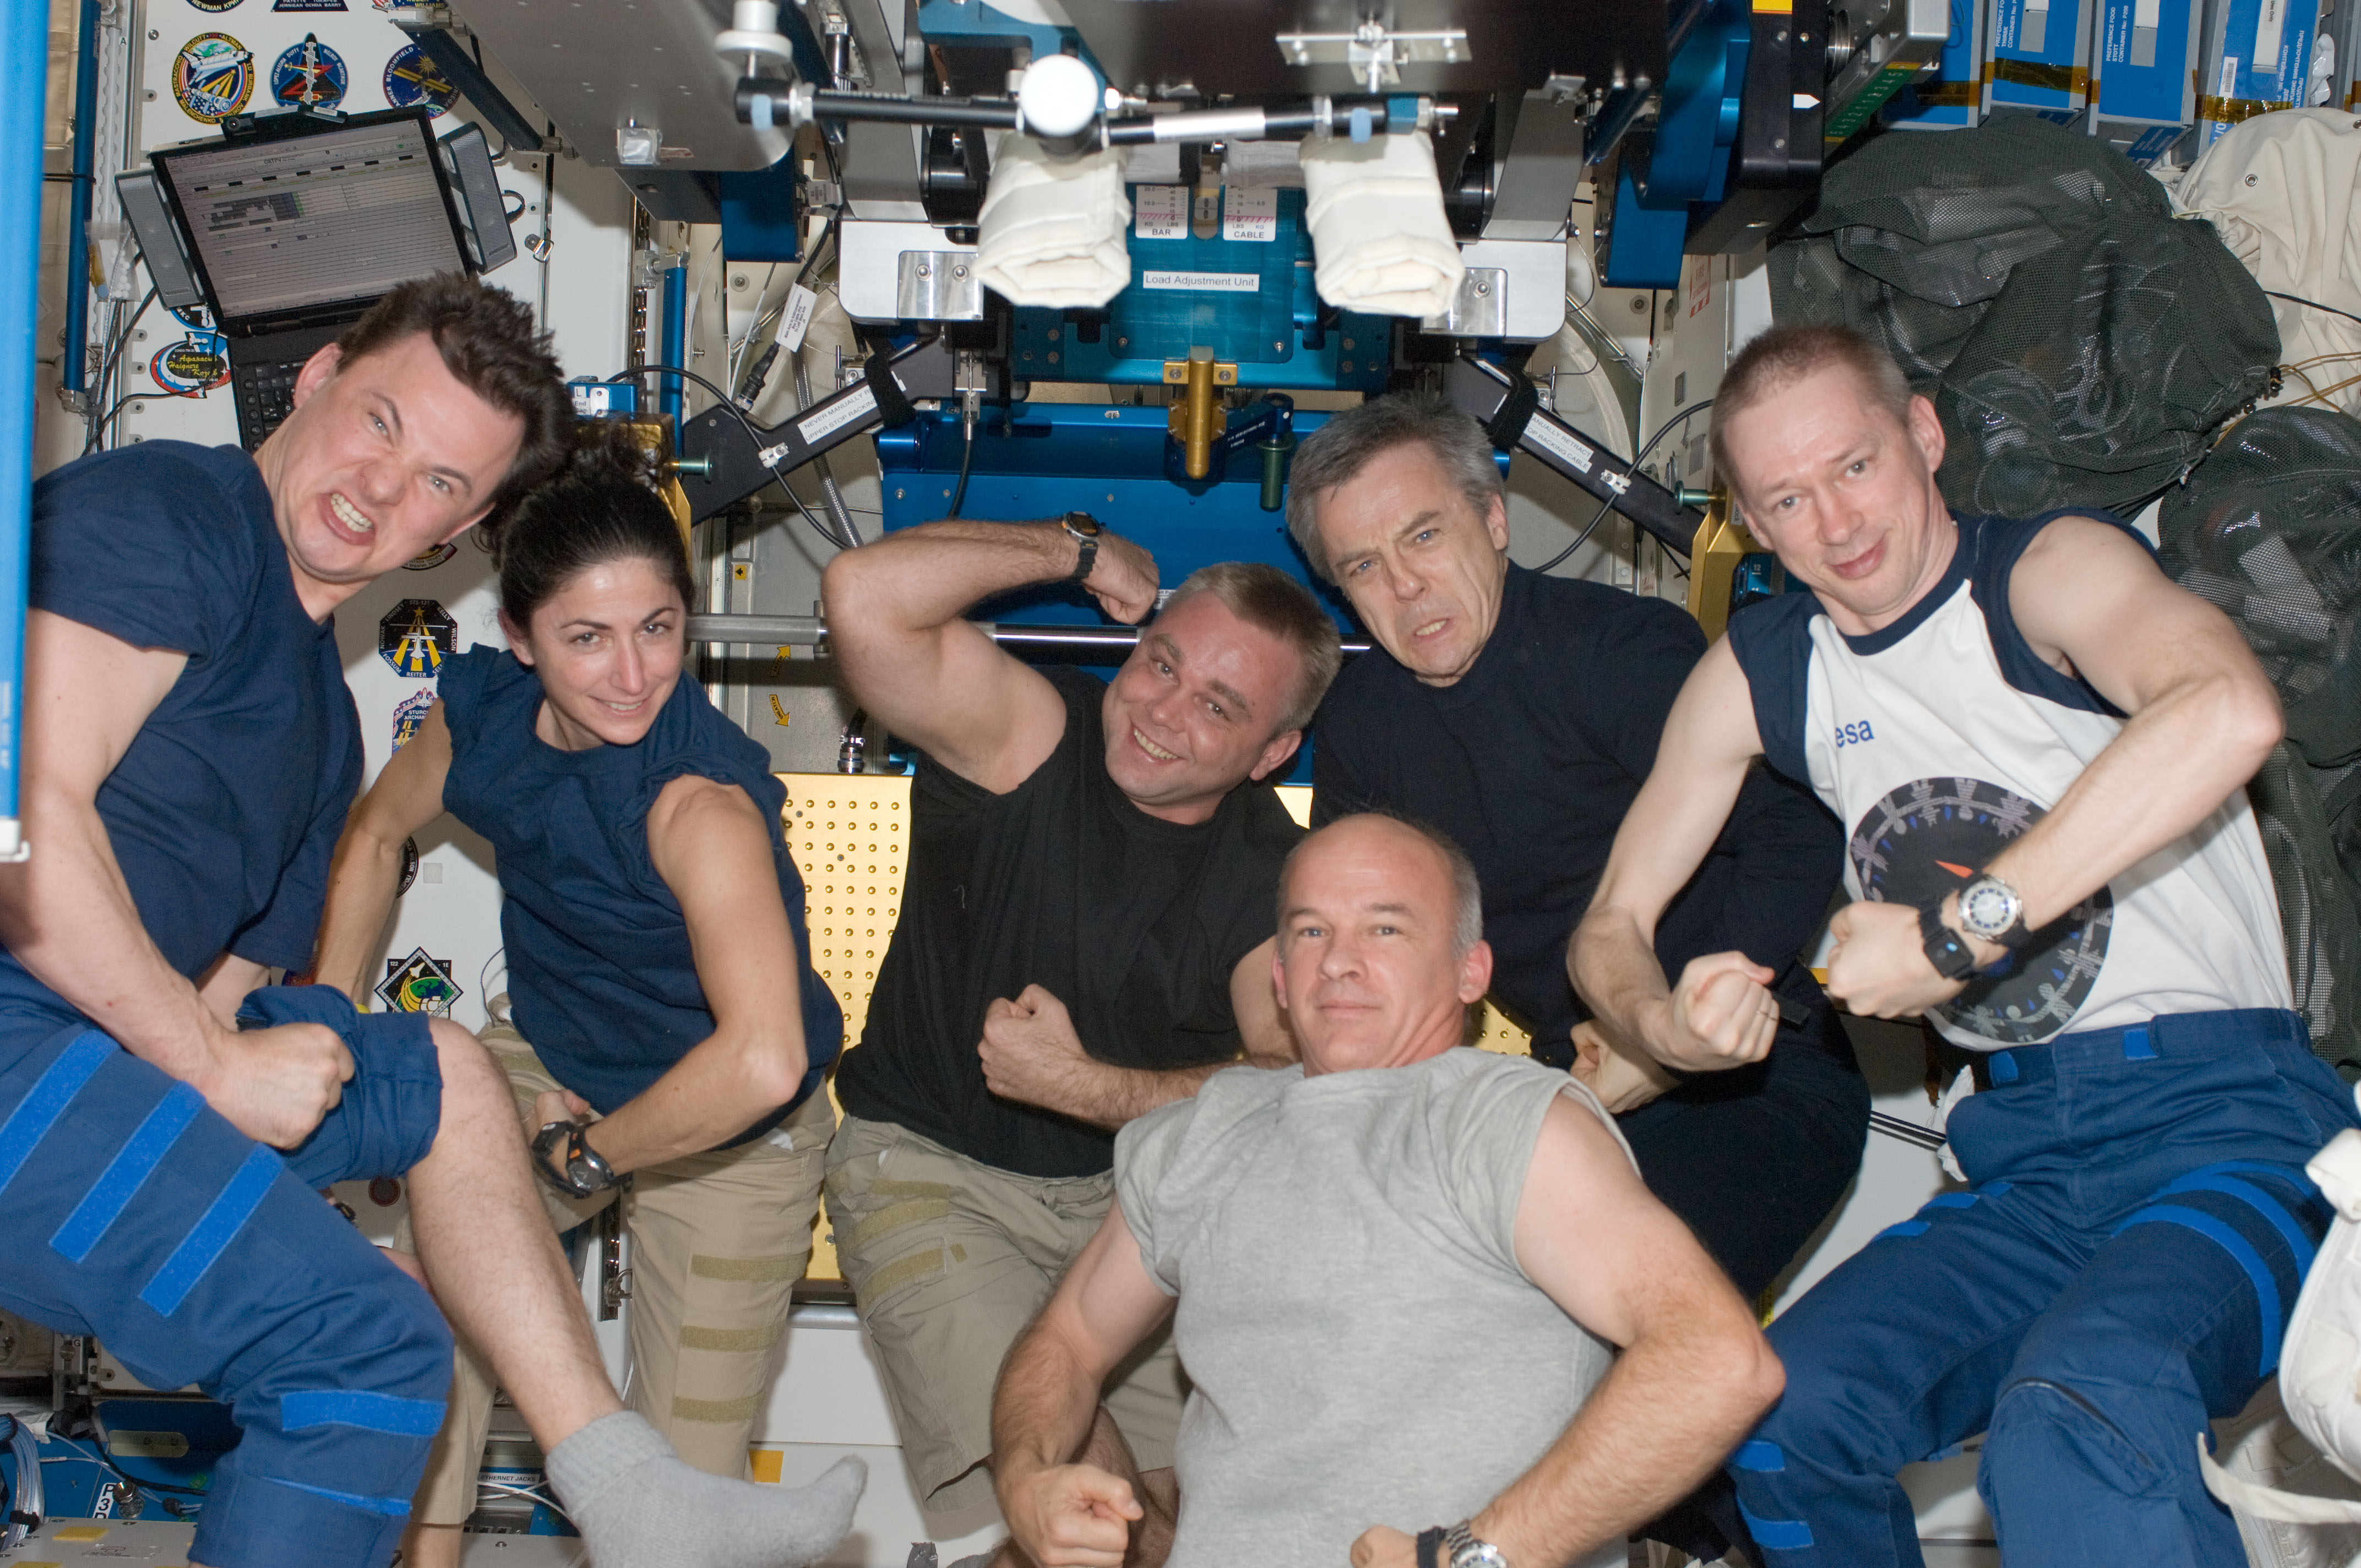 ISS-21 crew in a light moment in the Unity node